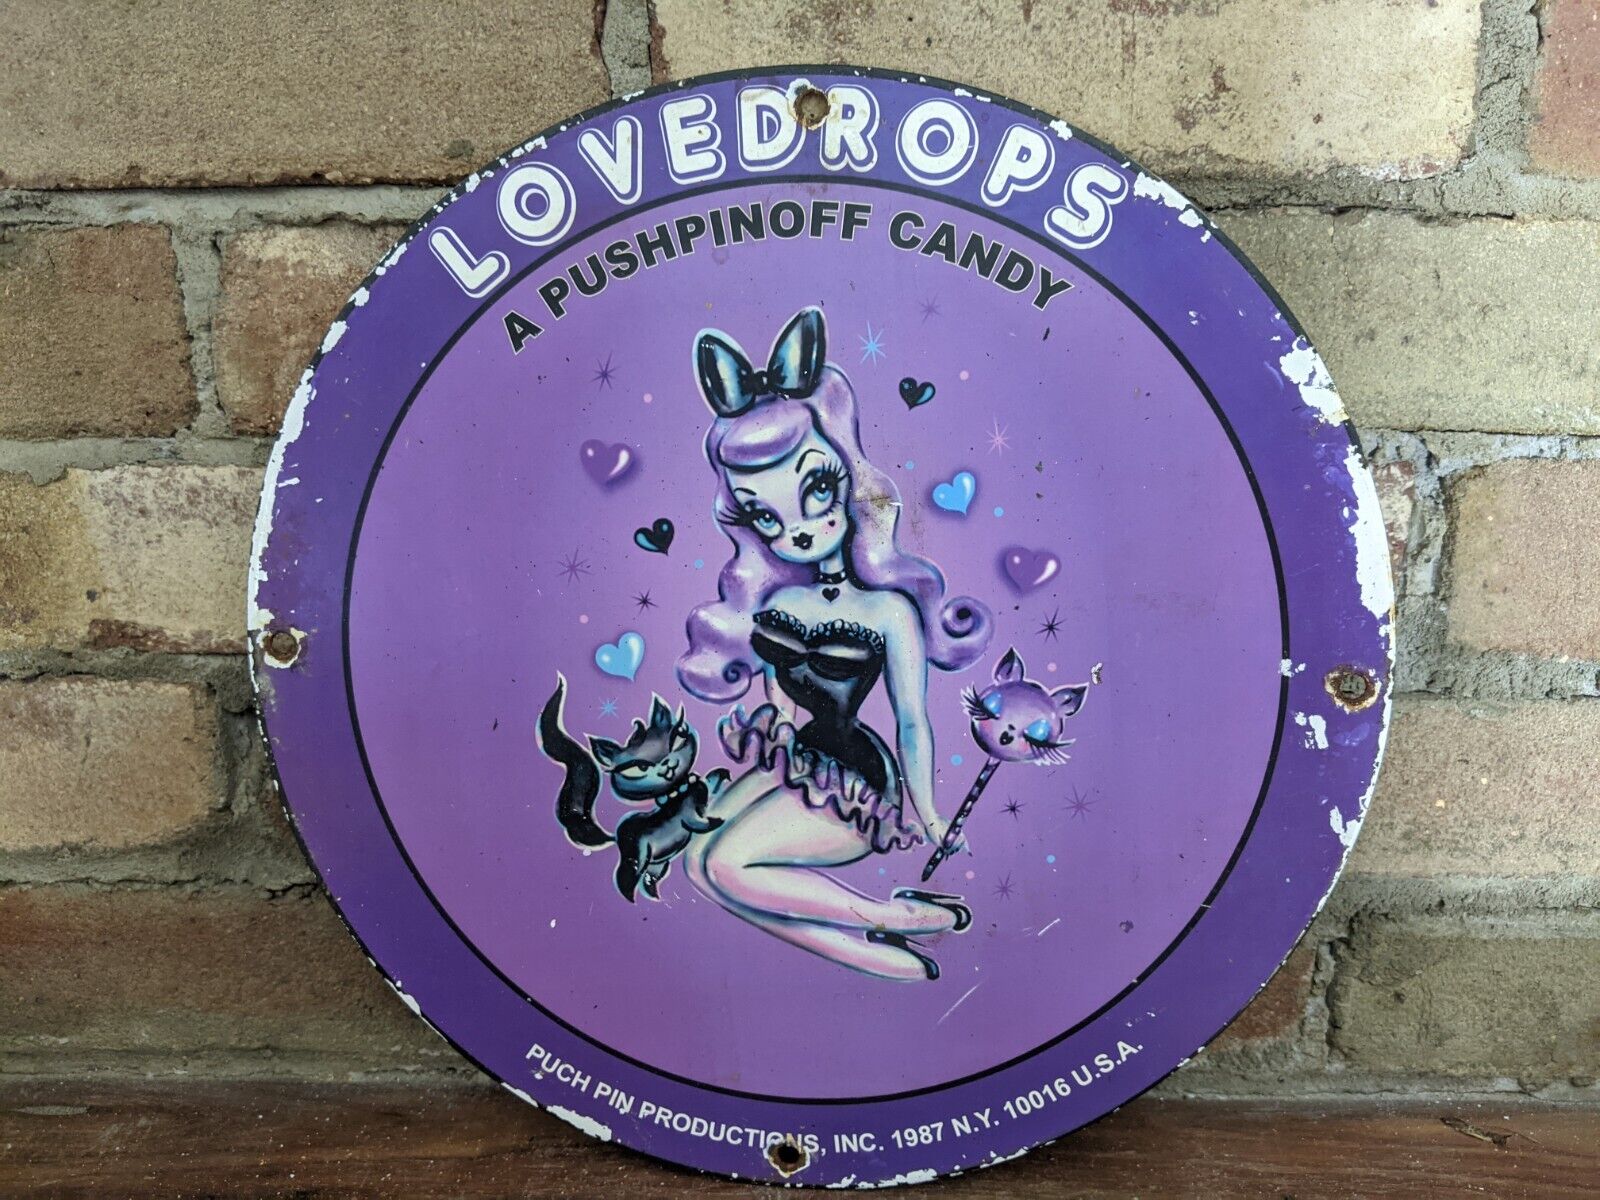 VINTAGE 1987 LOVE DROPS PUSHPINOFF CANDY PORCELAIN HEAVY METAL SIGN